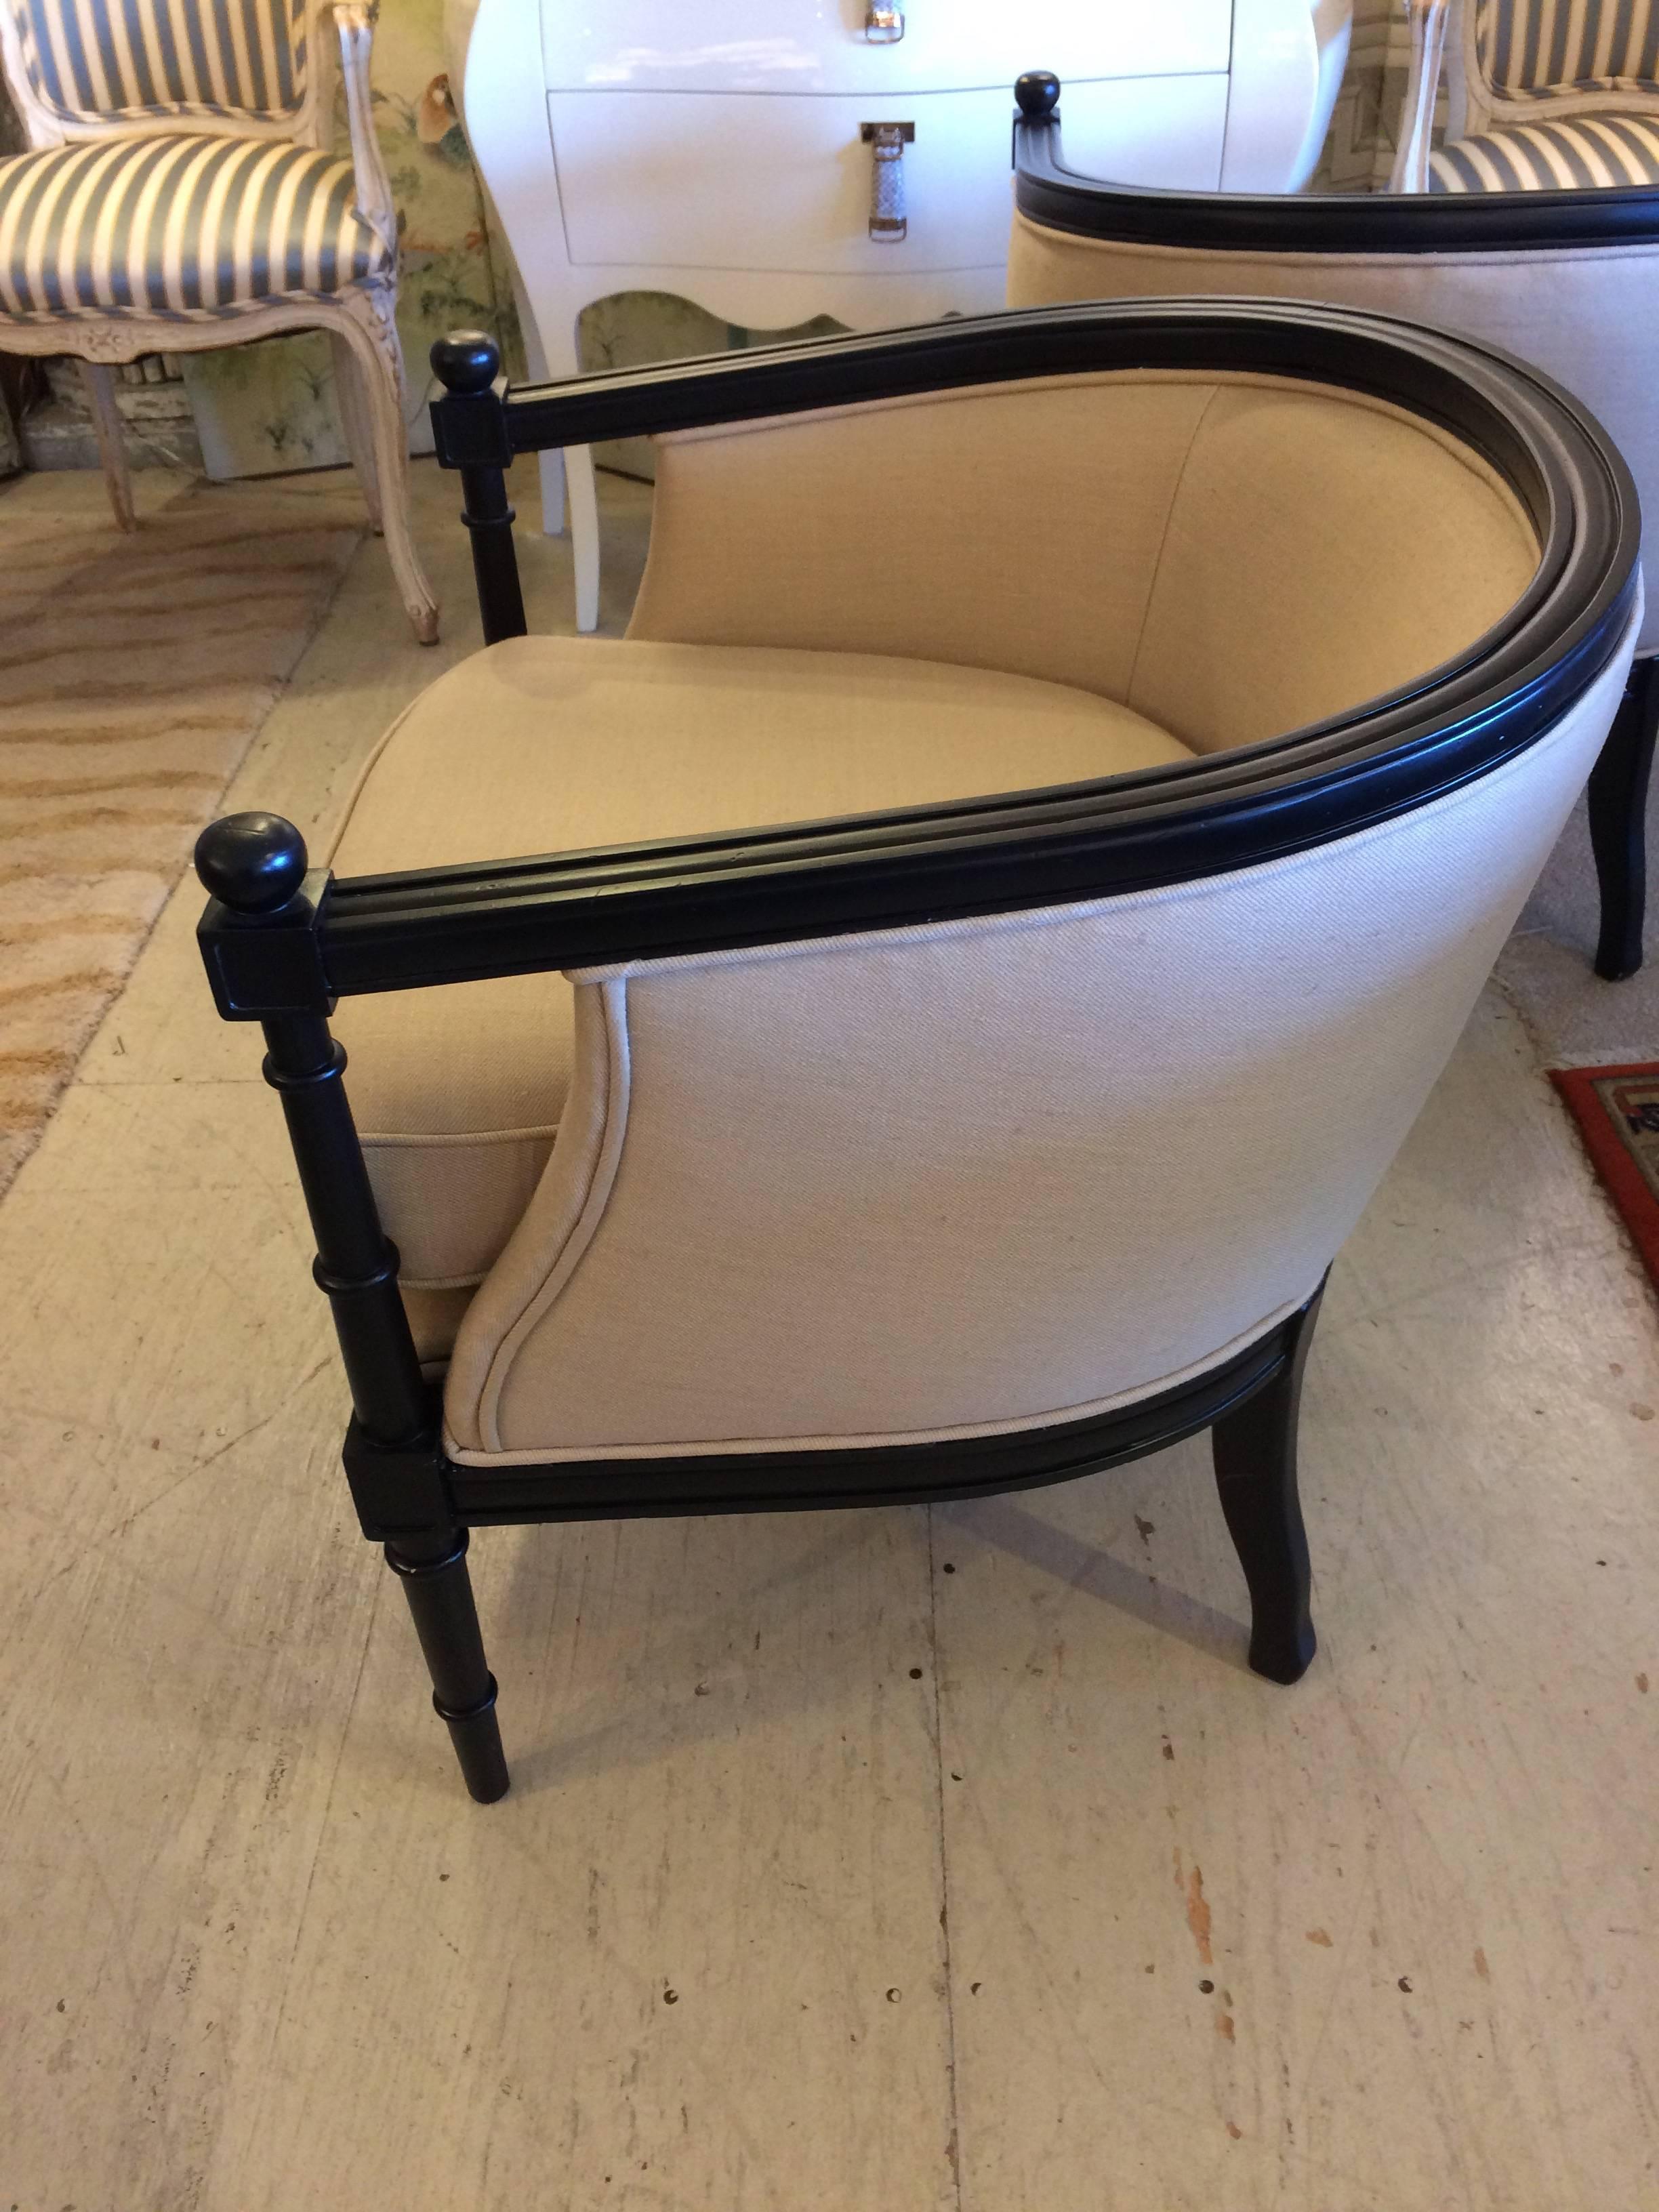 Two very sophisticated curvy barrel shaped tub chairs with newly ebonized frames and handsome neutral camel colored polished linen upholstery.